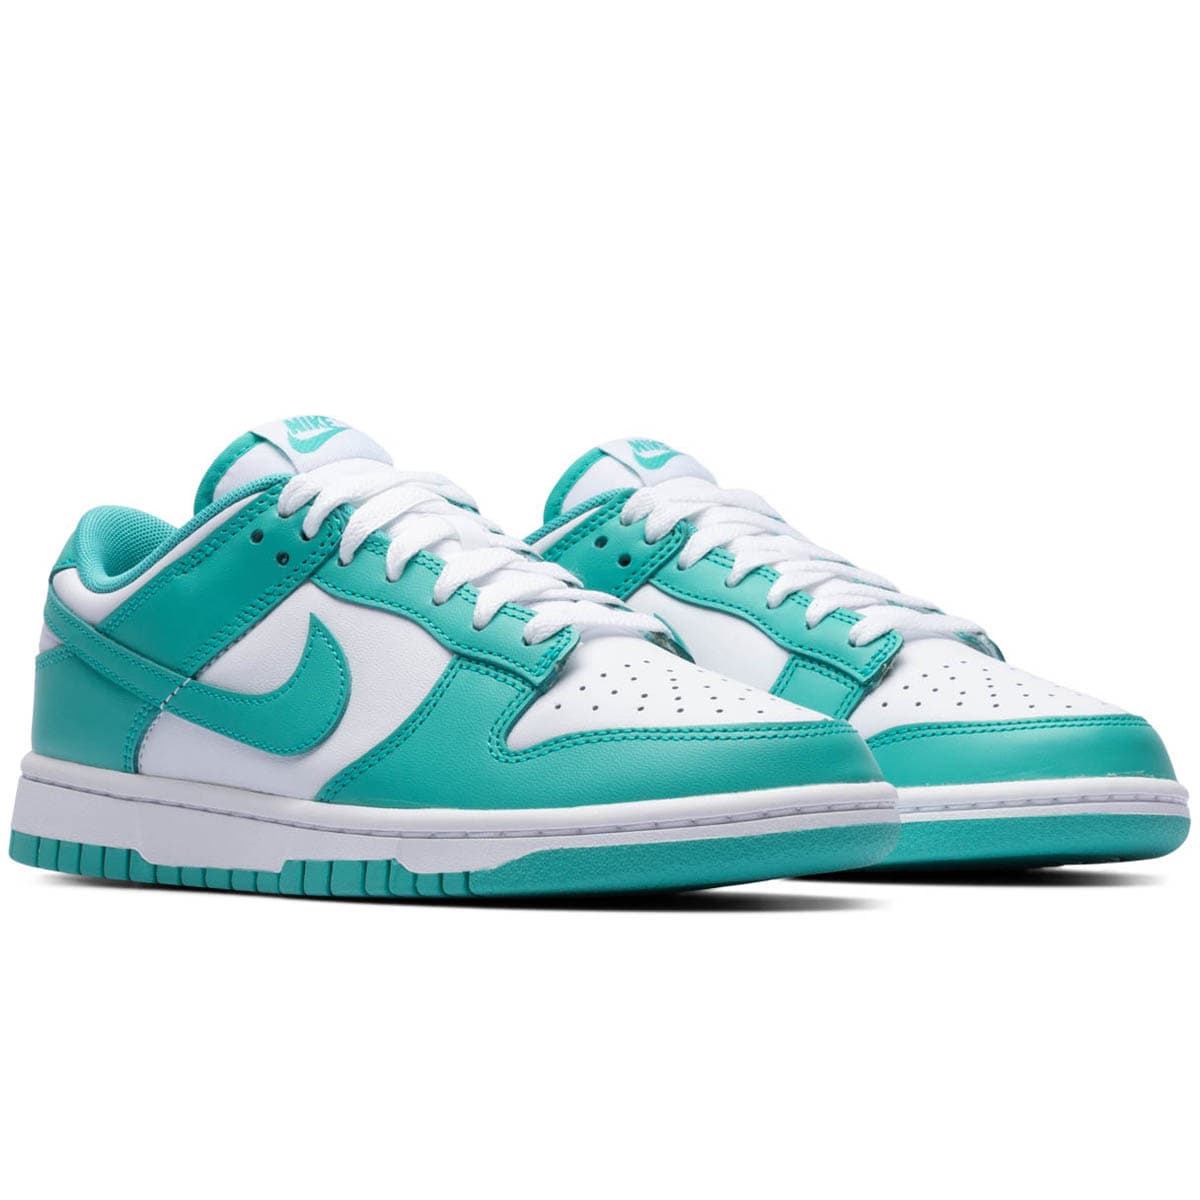 RETRO weekend Diamond Air - In to addition Nike \